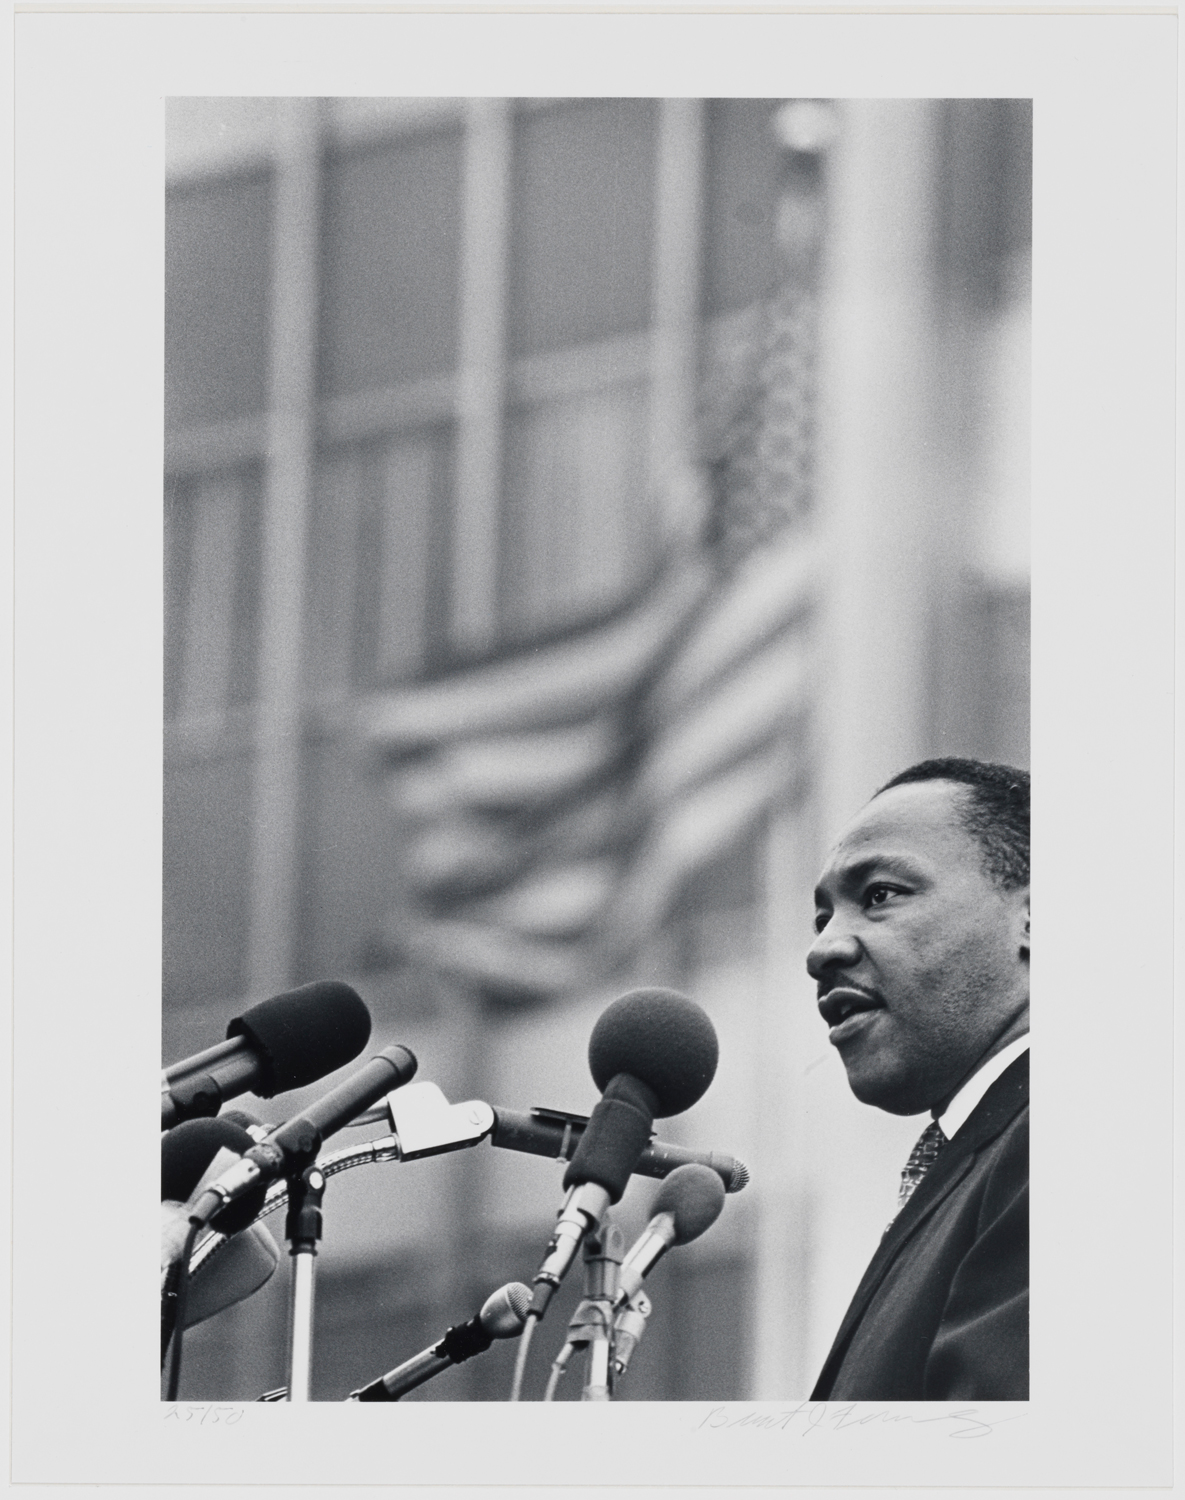 Black and white photograph of Martin Luthur King Jr. standing at a microphone with a building and flag waving behind him.